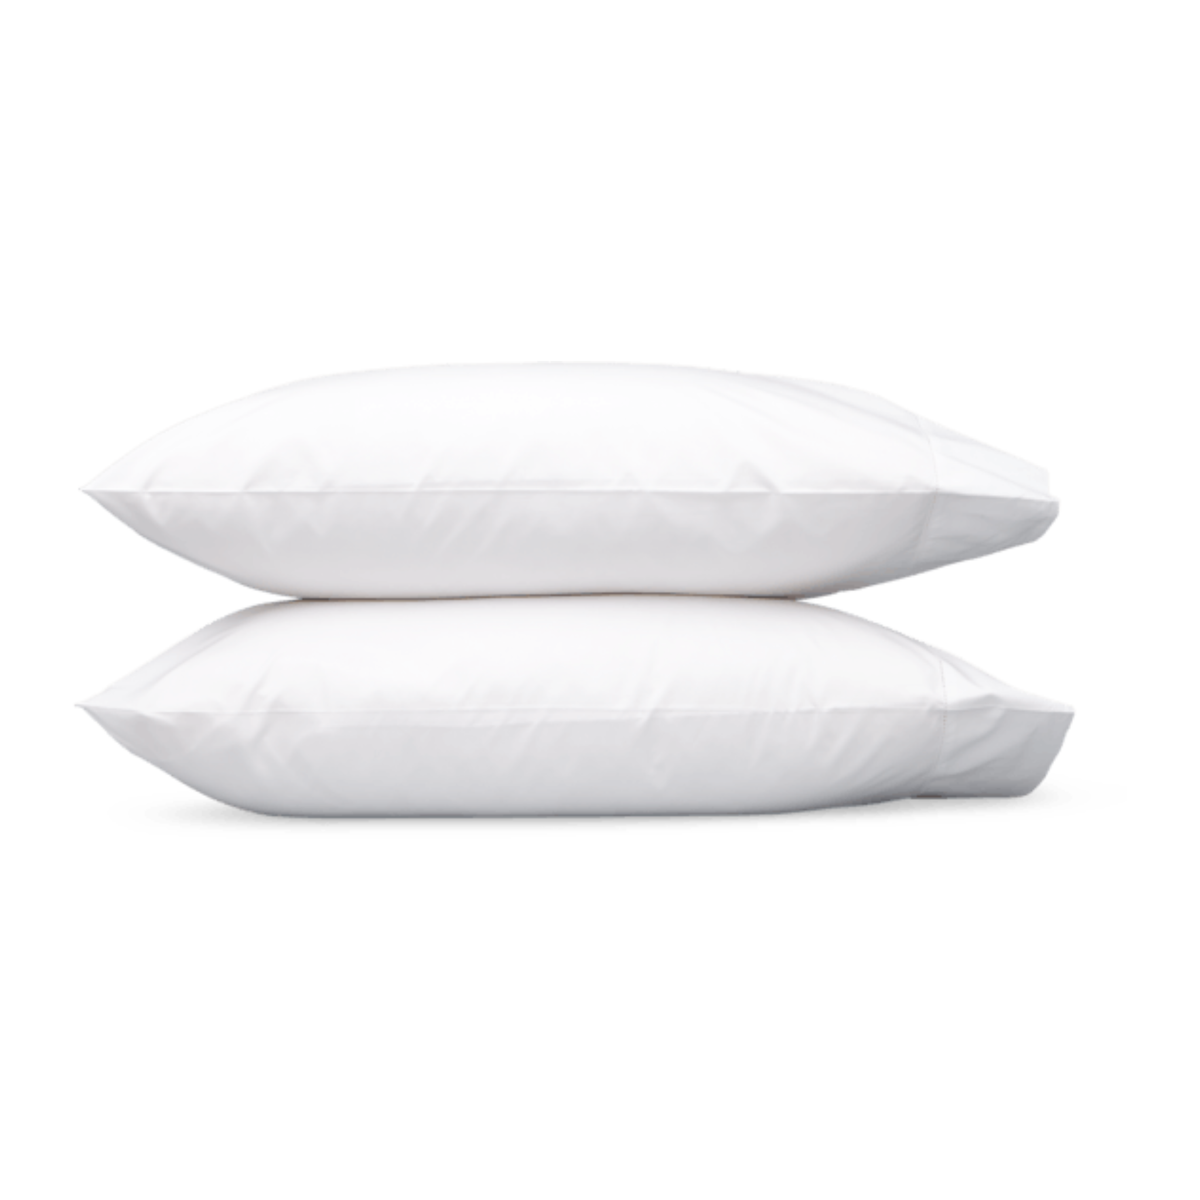 Pair of Pillowcases of Matouk Luca Hemstitch Bedding in White Color